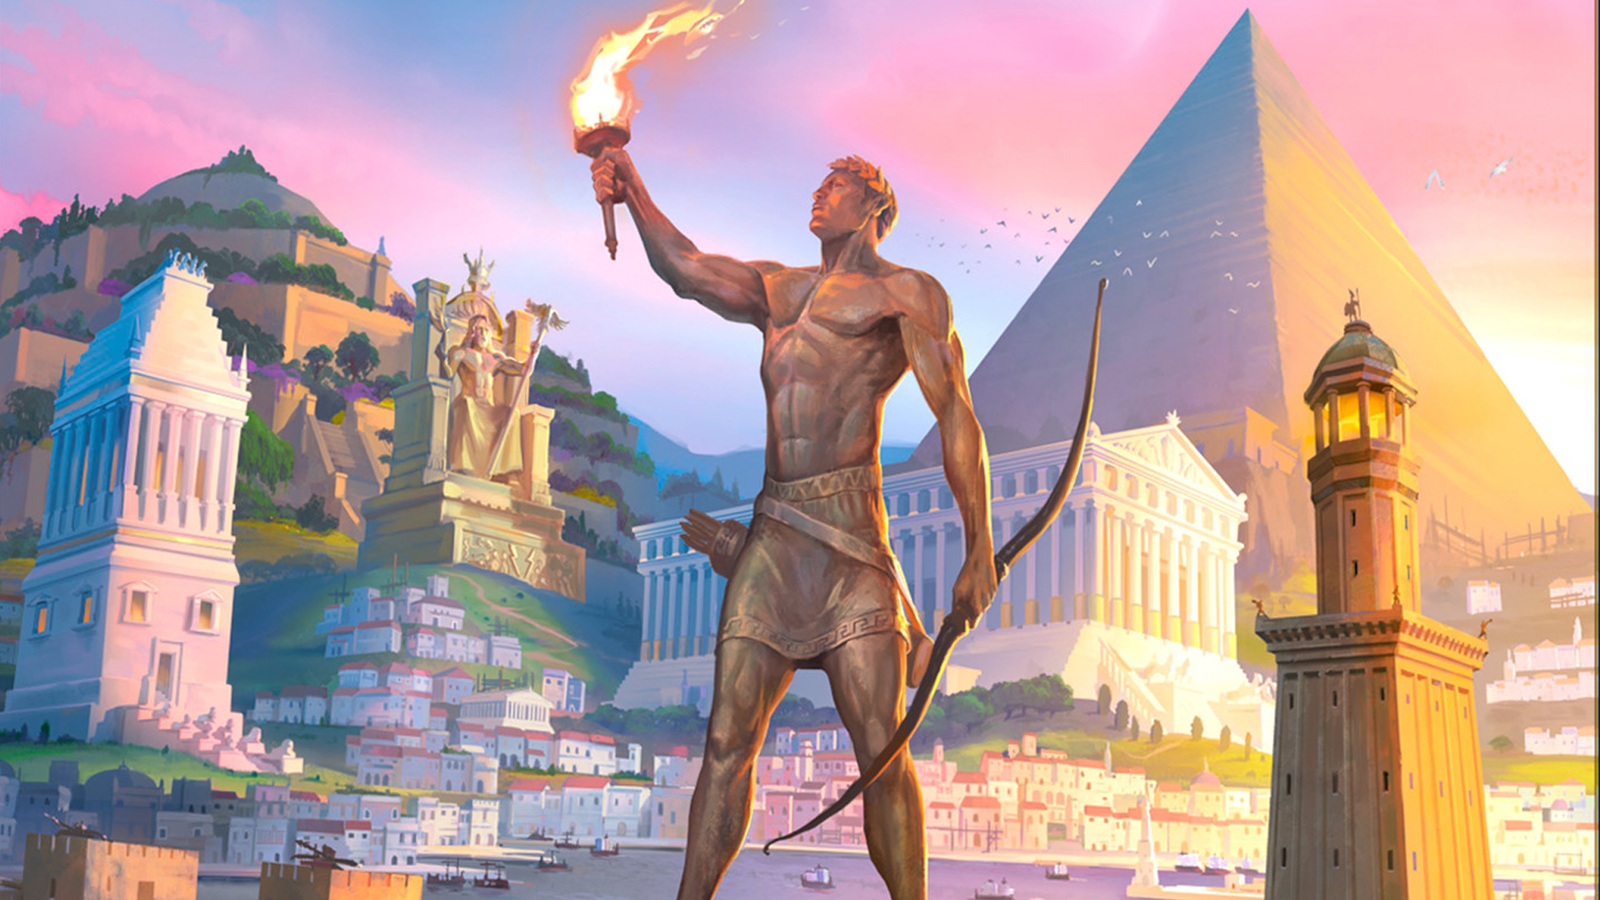 7 Wonders Duel: the essential two-player game! - Repos Production